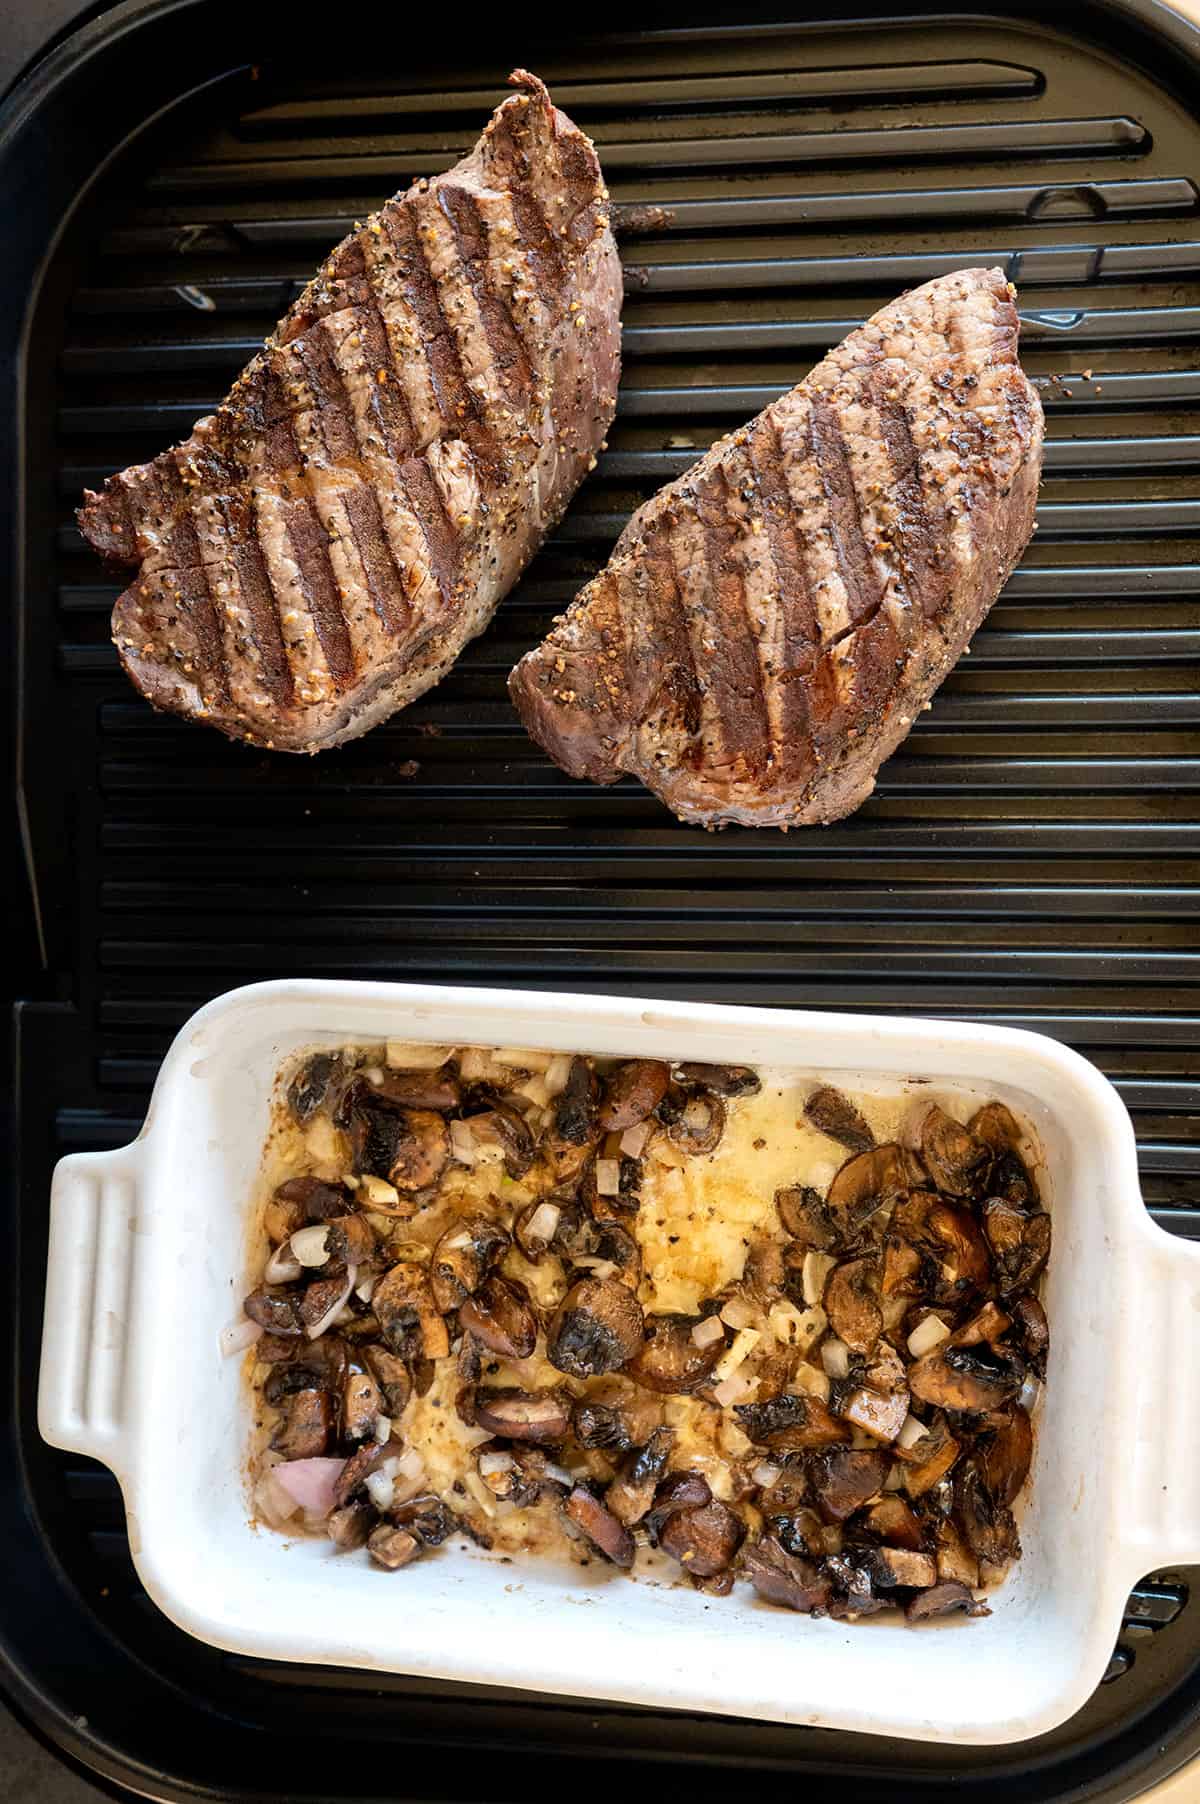 2 filet steaks on grill with small baking dish with sauteed mushrooms on ninja grill.